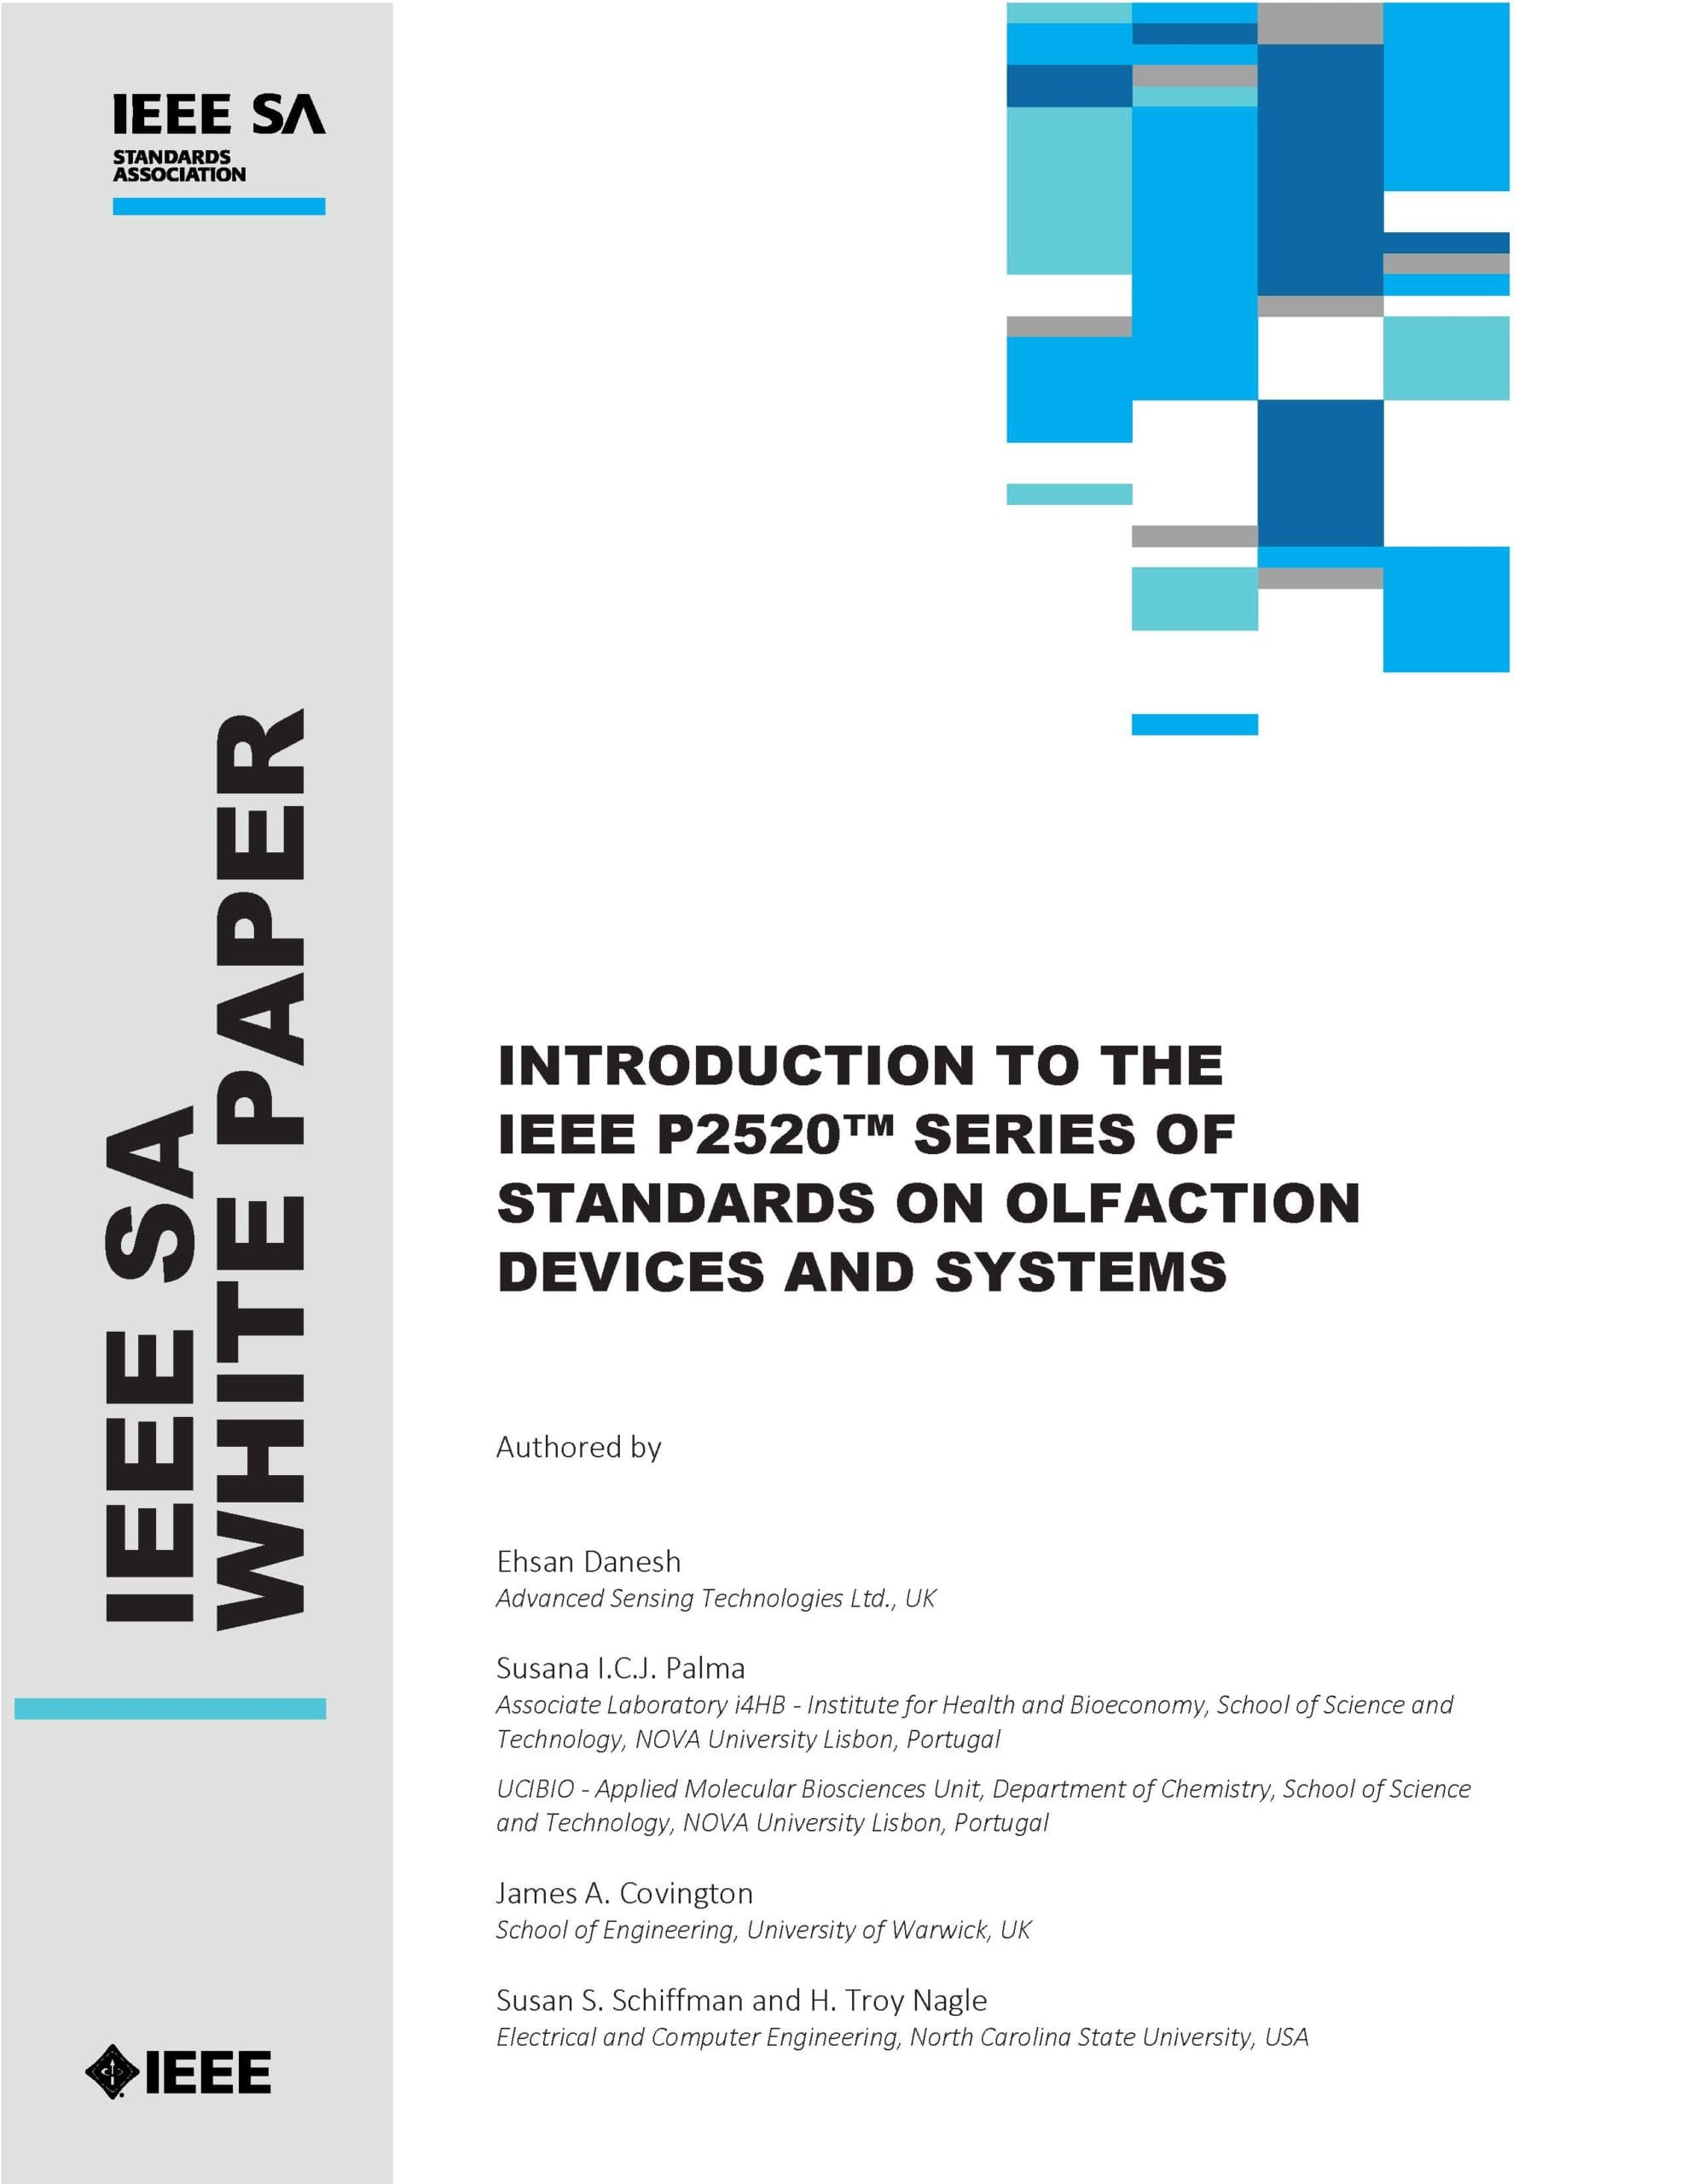 Introduction to the IEEE P2520 Series of Standards on Olfaction Devices and Systems